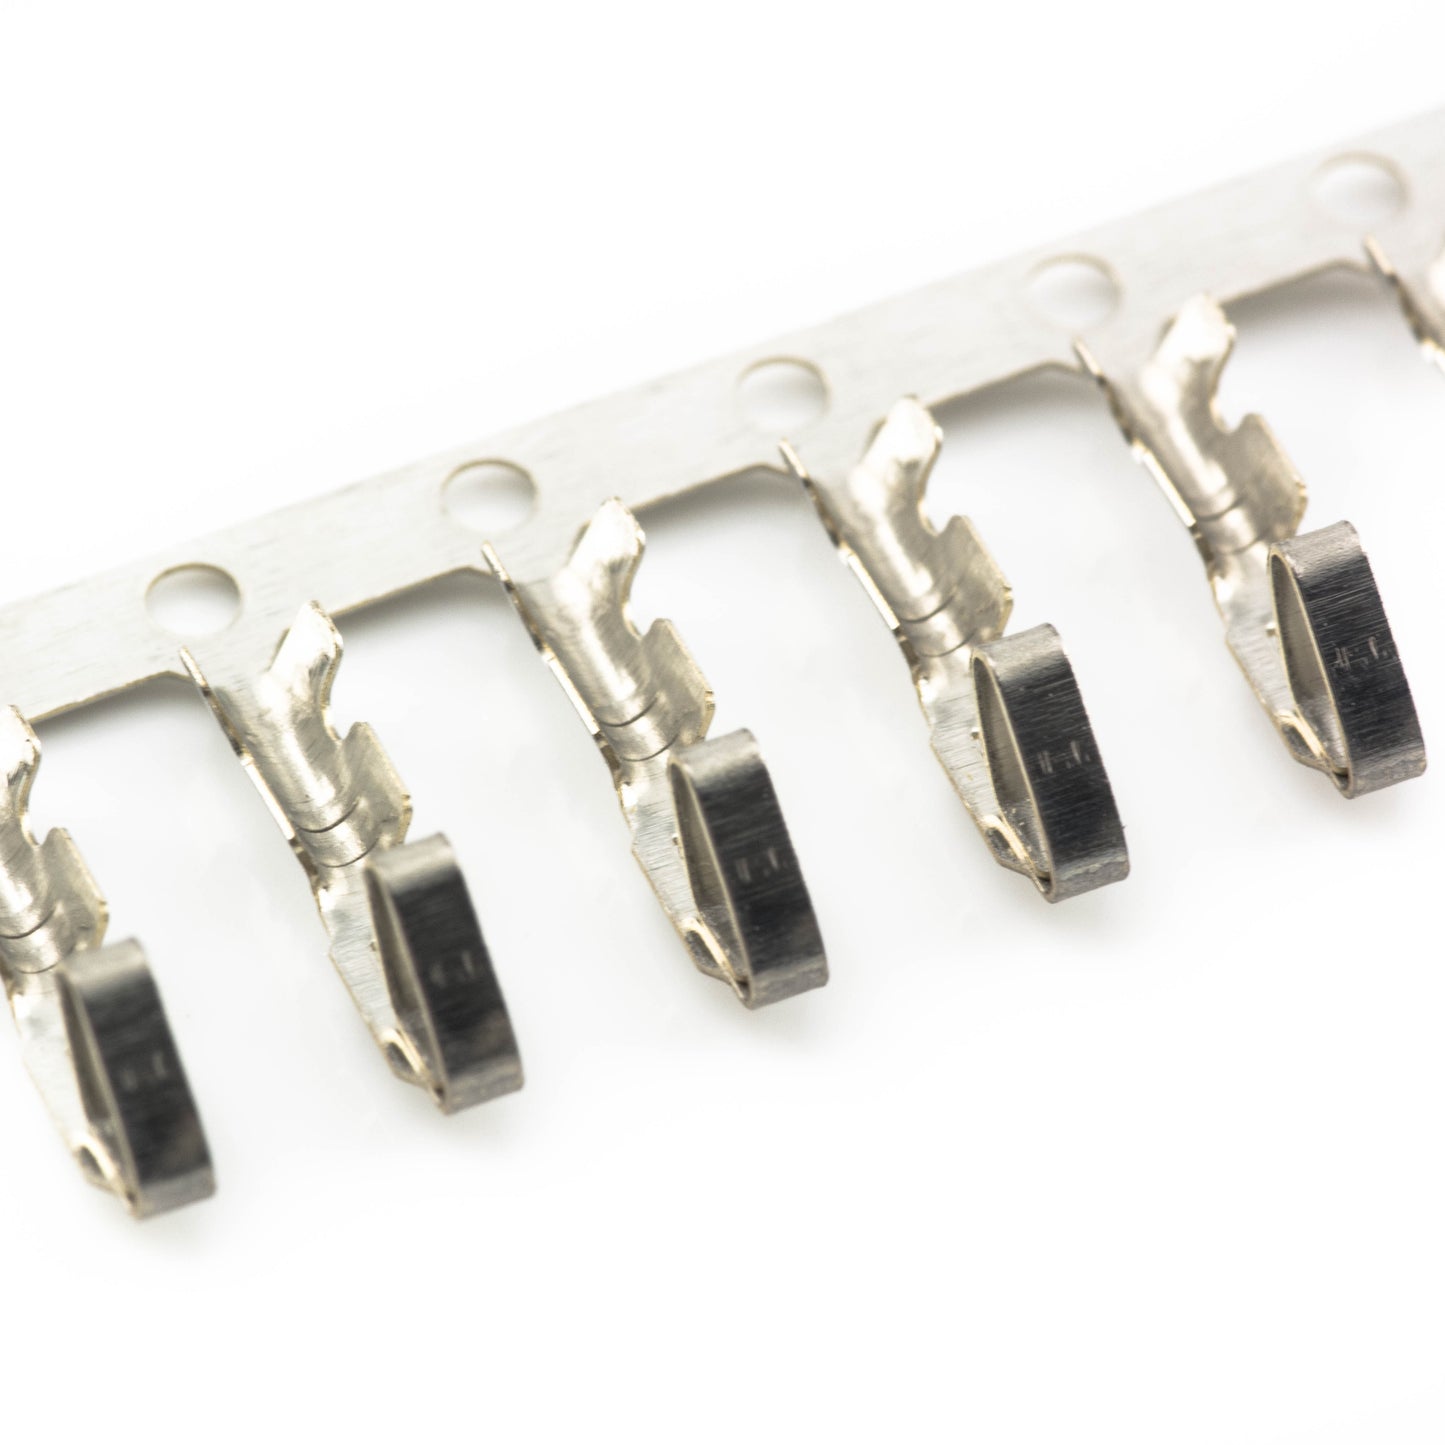 Female 4-Pin PWM Fan Connector Kit - 10 Pack